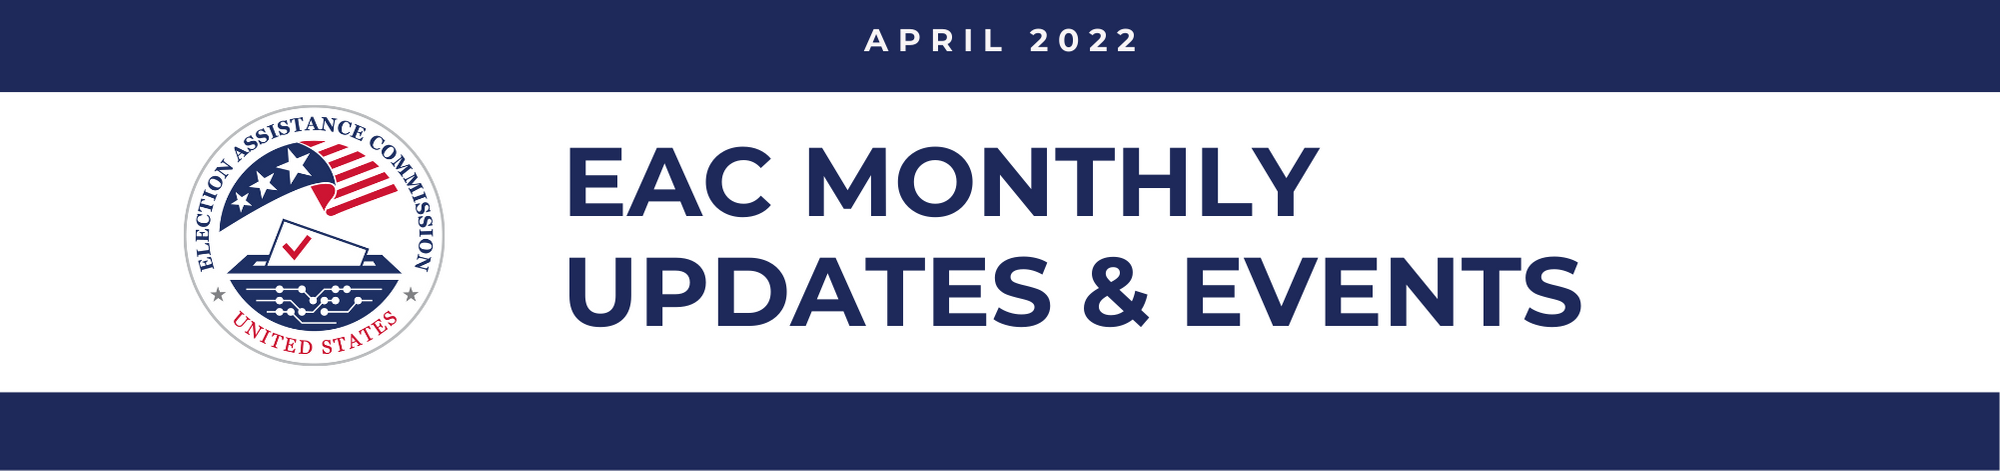 April 2022 EAC Monthly Updates & Events